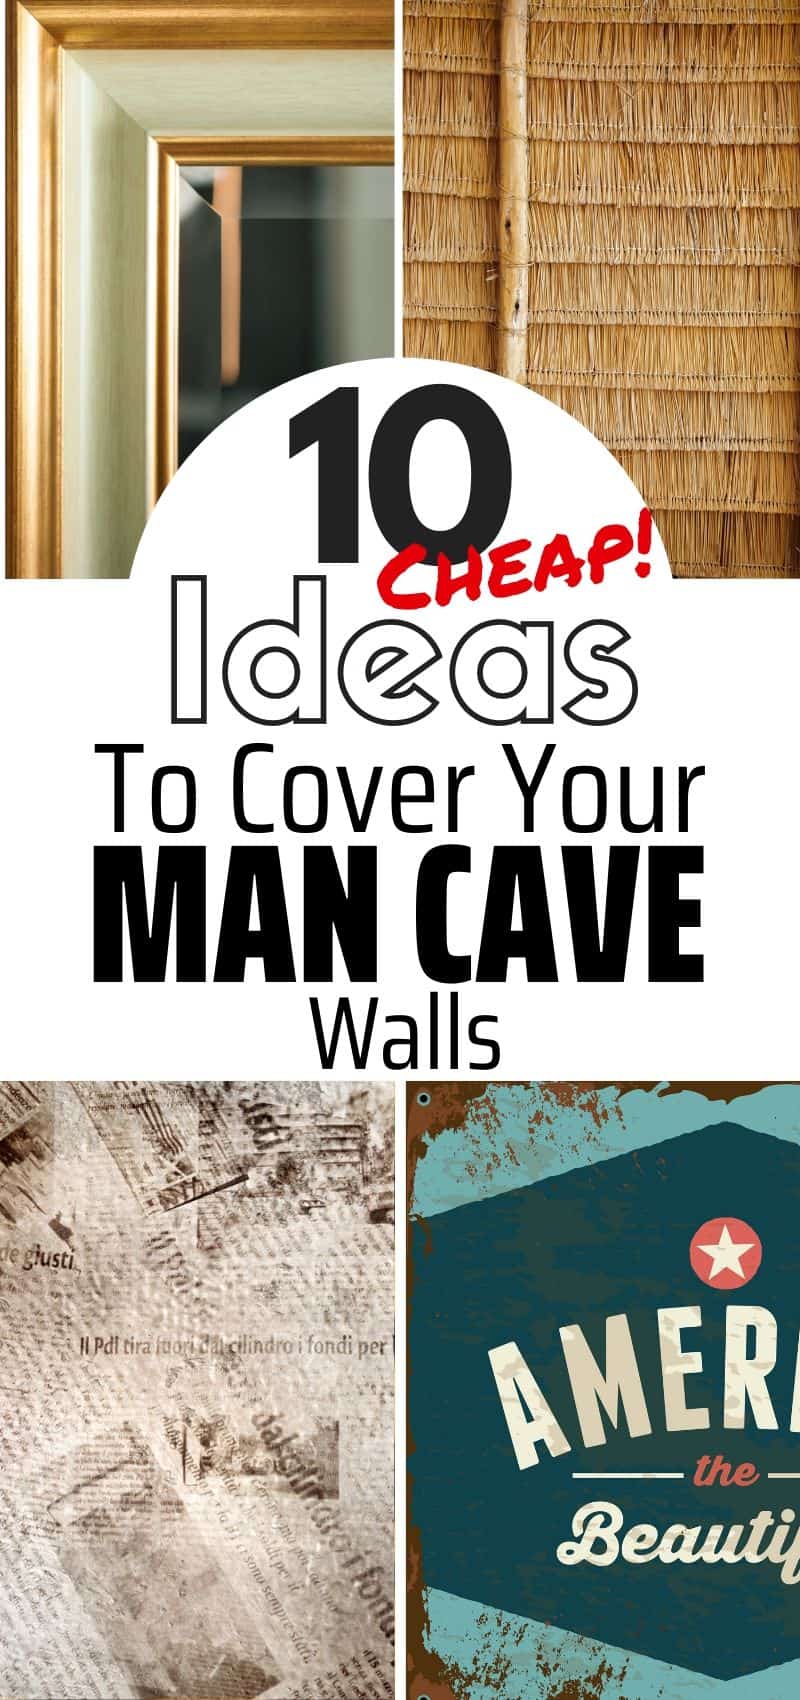 Cover your man cave walls